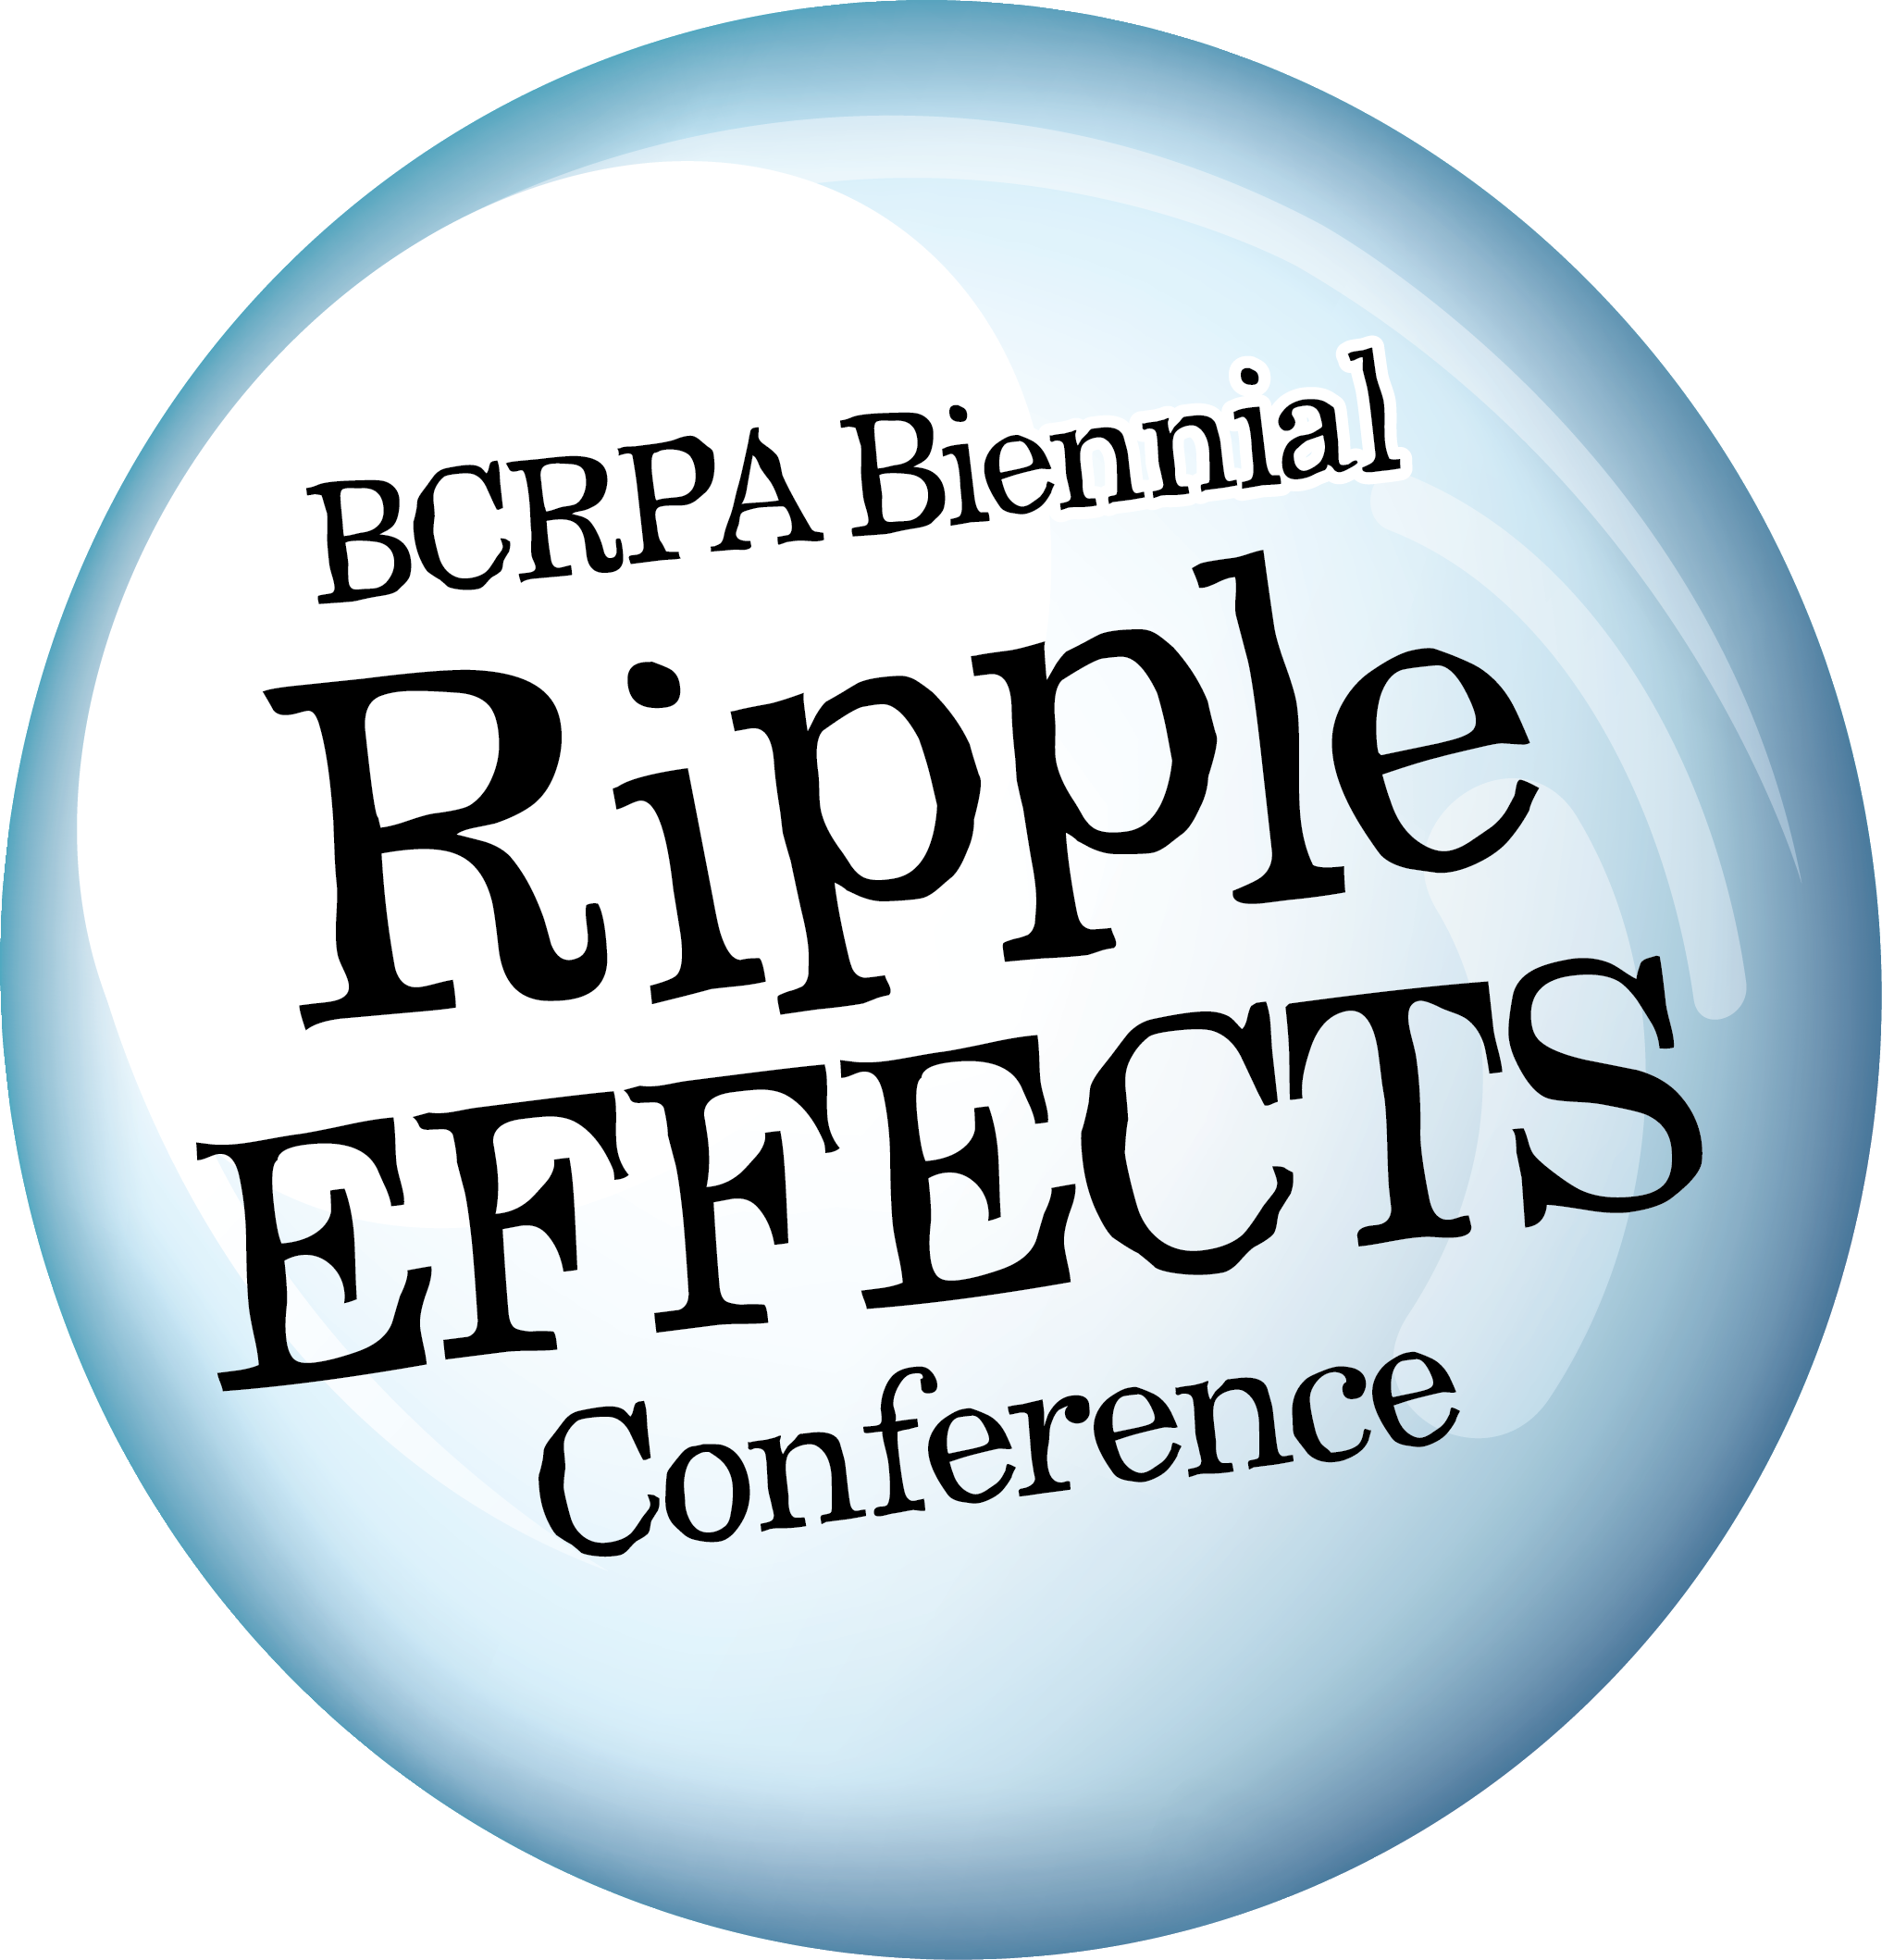 Ripple Effects Conference Logo